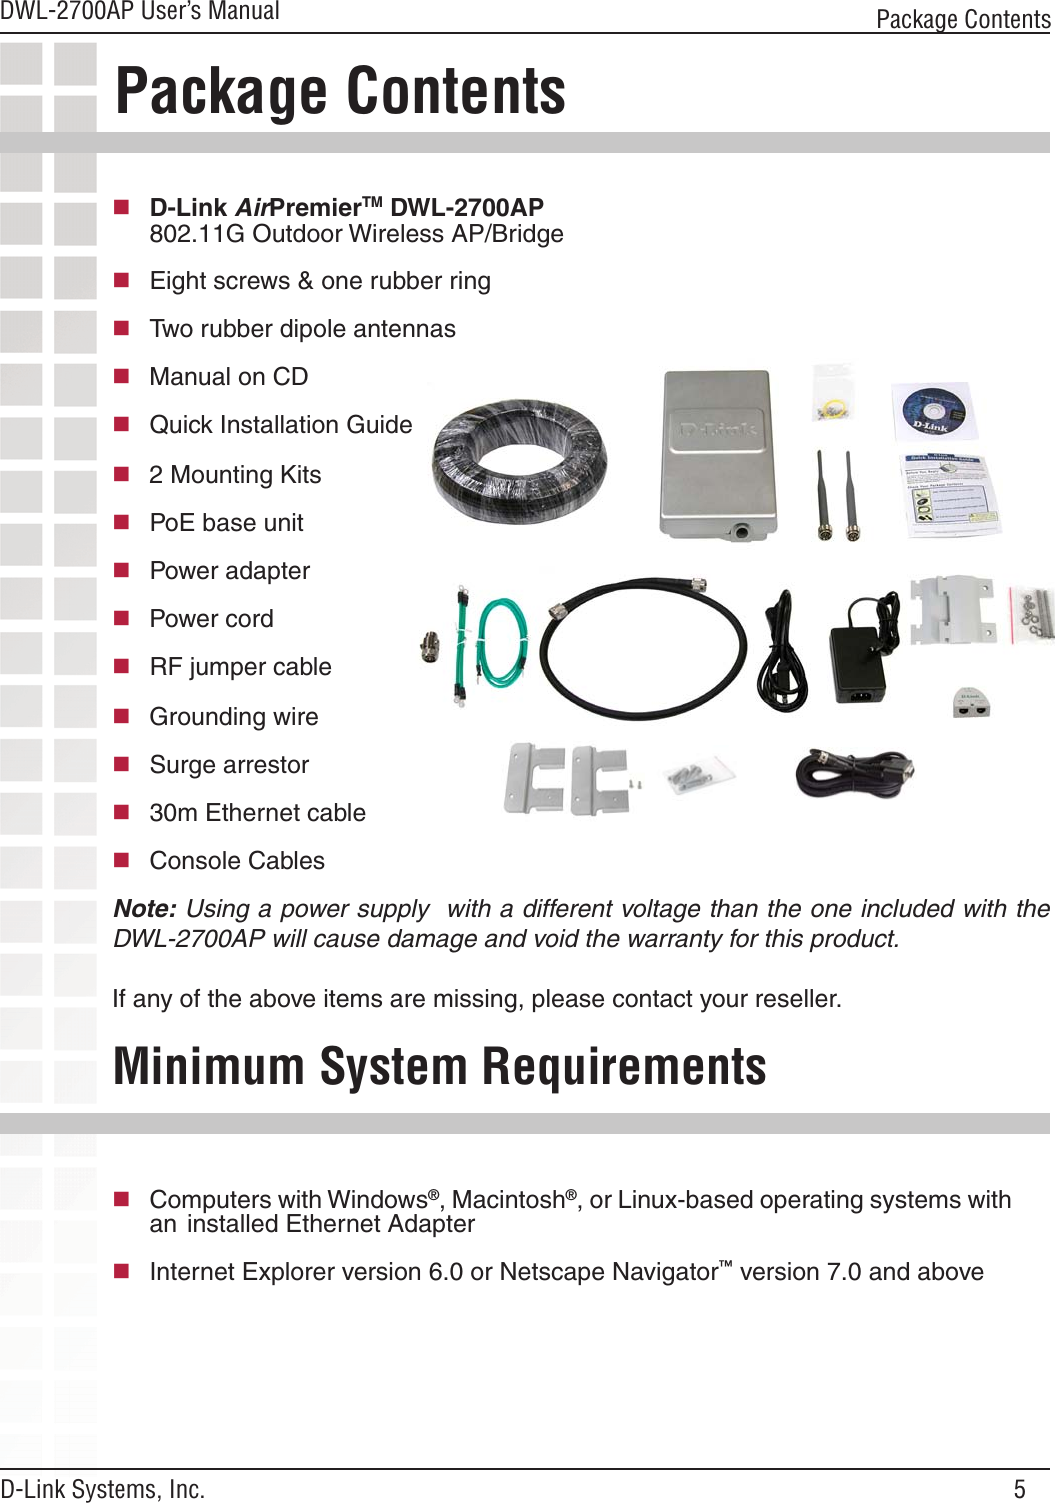 5DWL-2700AP User’s ManualD-Link Systems, Inc.Package Contents Minimum System Requirements Note: Using a power supply  with a different voltage than the one included with the DWL-2700AP will cause damage and void the warranty for this product.If any of the above items are missing, please contact your reseller.Computers with Windows®, Macintosh®, or Linux-based operating systems with an  installed Ethernet AdapterInternet Explorer version 6.0 or Netscape Navigator™ version 7.0 and abovePackage Contents D-Link AirPremierTM DWL-2700AP   802.11G Outdoor Wireless AP/Bridge   Eight screws &amp; one rubber ring Two rubber dipole antennas  Manual on CDQuick Installation Guide  2 Mounting Kits   PoE base unitPower adapter  Power cordRF jumper cable  Grounding wire   Surge arrestor 30m Ethernet cableConsole Cables